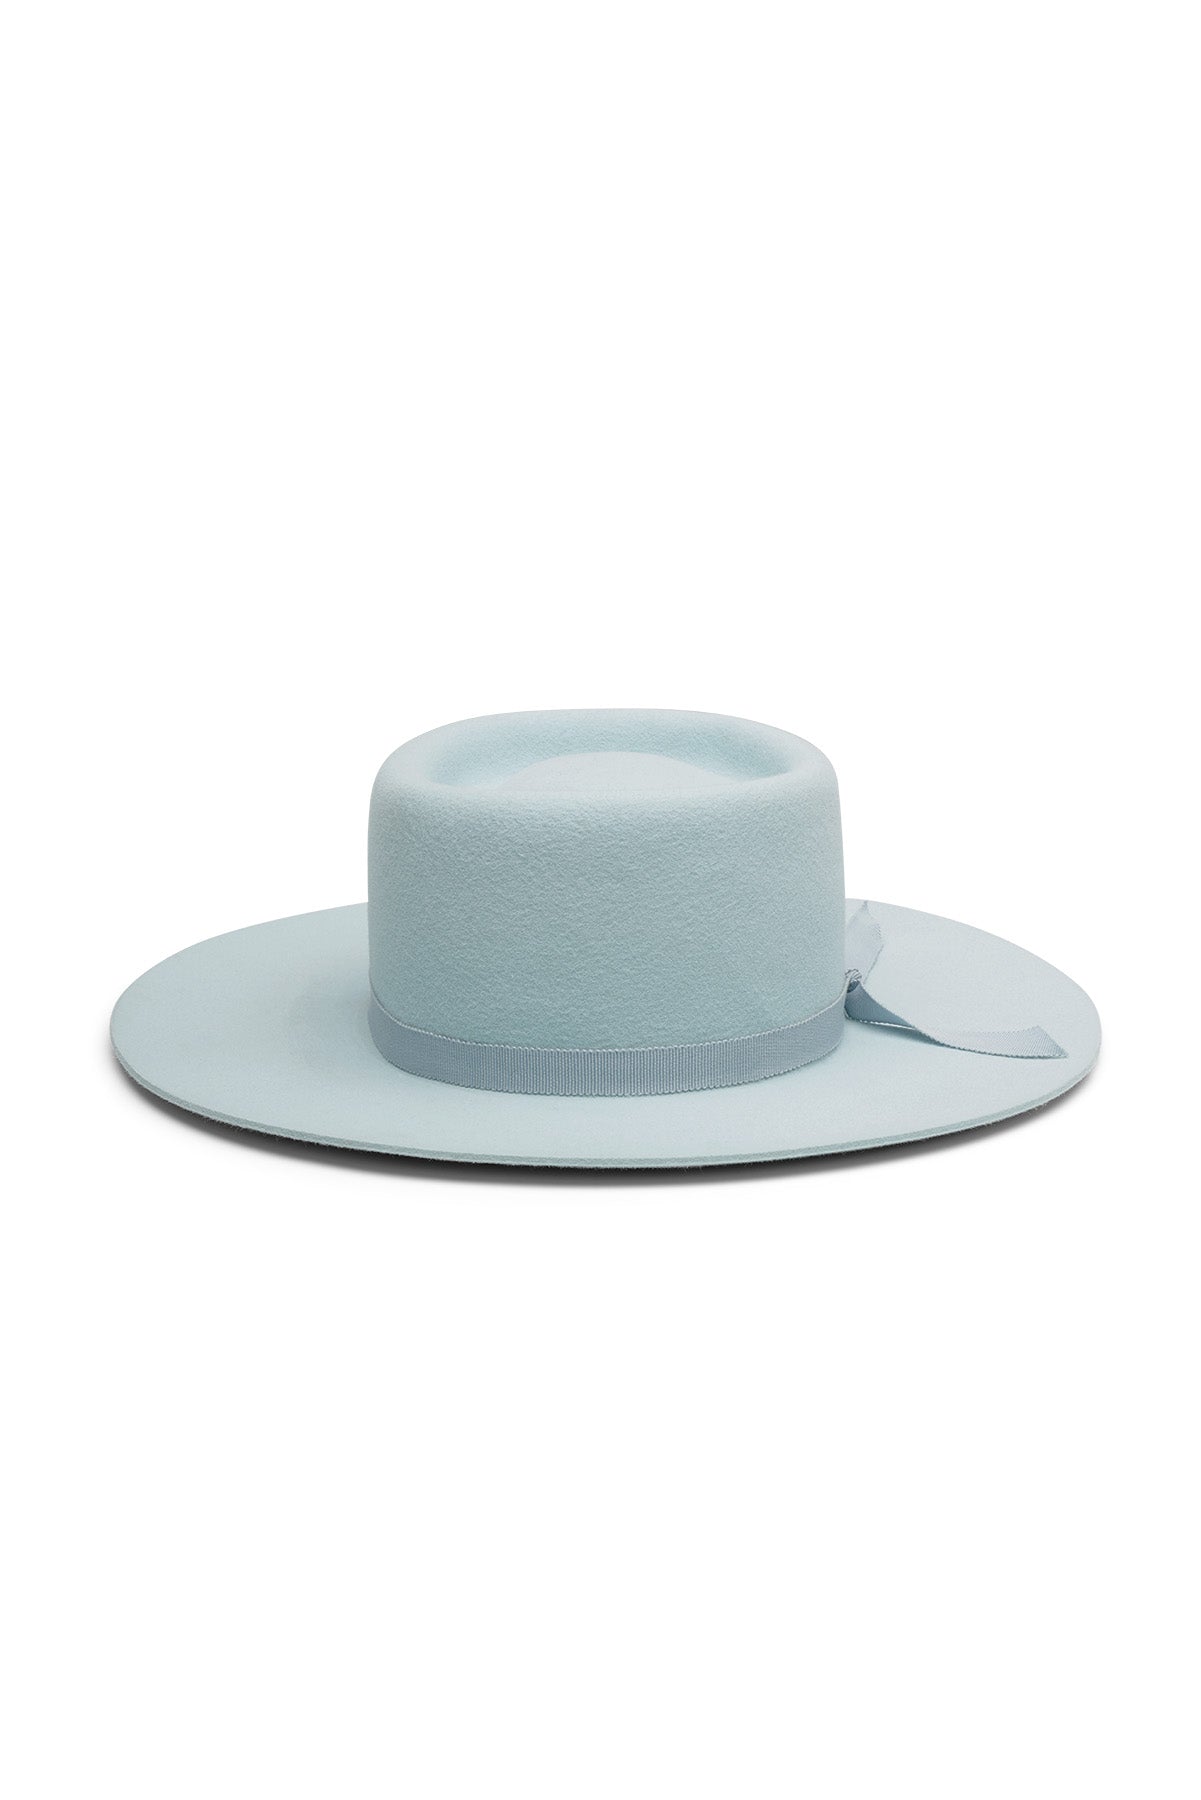 Sky blue fur felt bolero style hat with a round telescope crease, flat brim, and tonal grosgrain ribbon. Unisex hat style in various sizes and colors. We ship worldwide. Shop now. Each SoonNoon hat is handmade with unique character in Stockholm, Sweden.